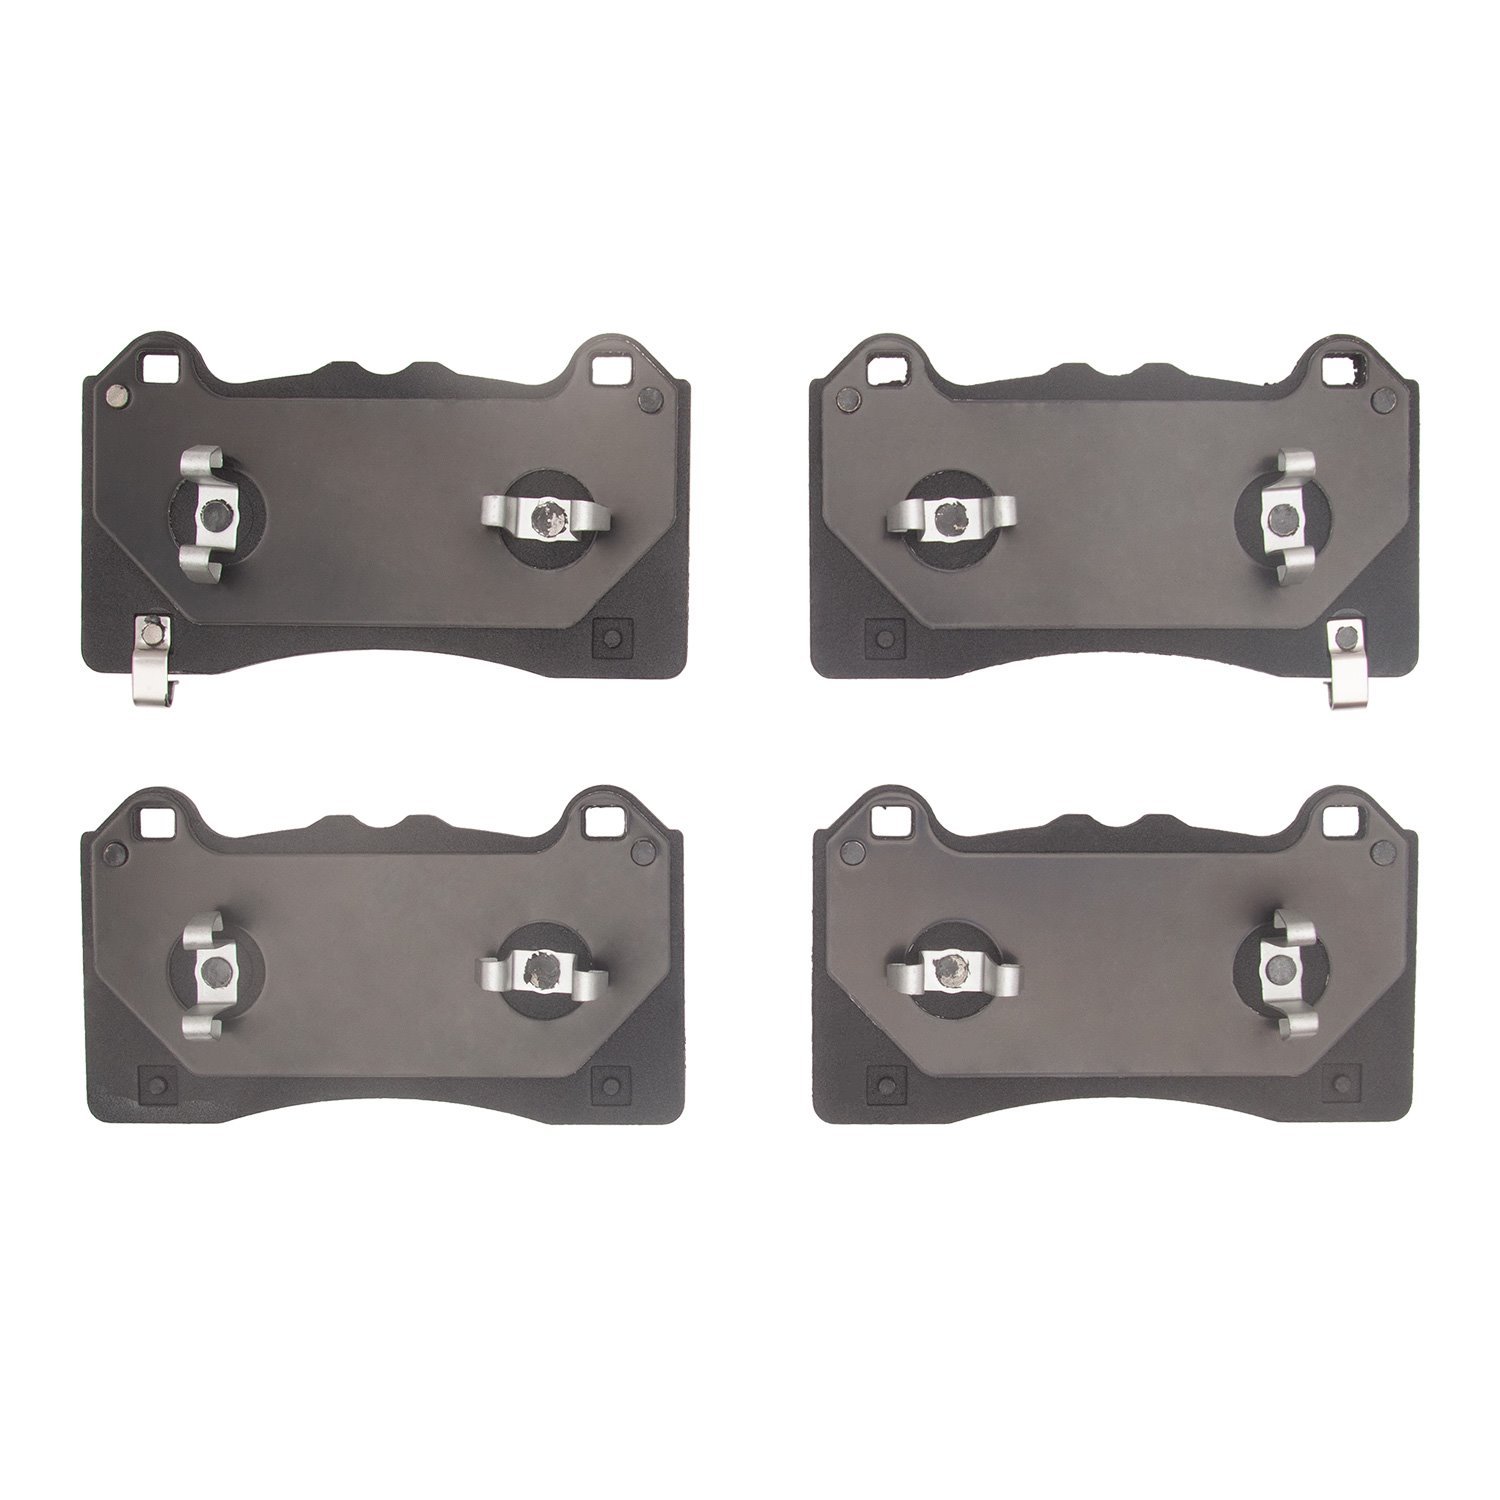 1551-2390-00 5000 Advanced Low-Metallic Brake Pads, Fits Select Ford/Lincoln/Mercury/Mazda, Position: Front